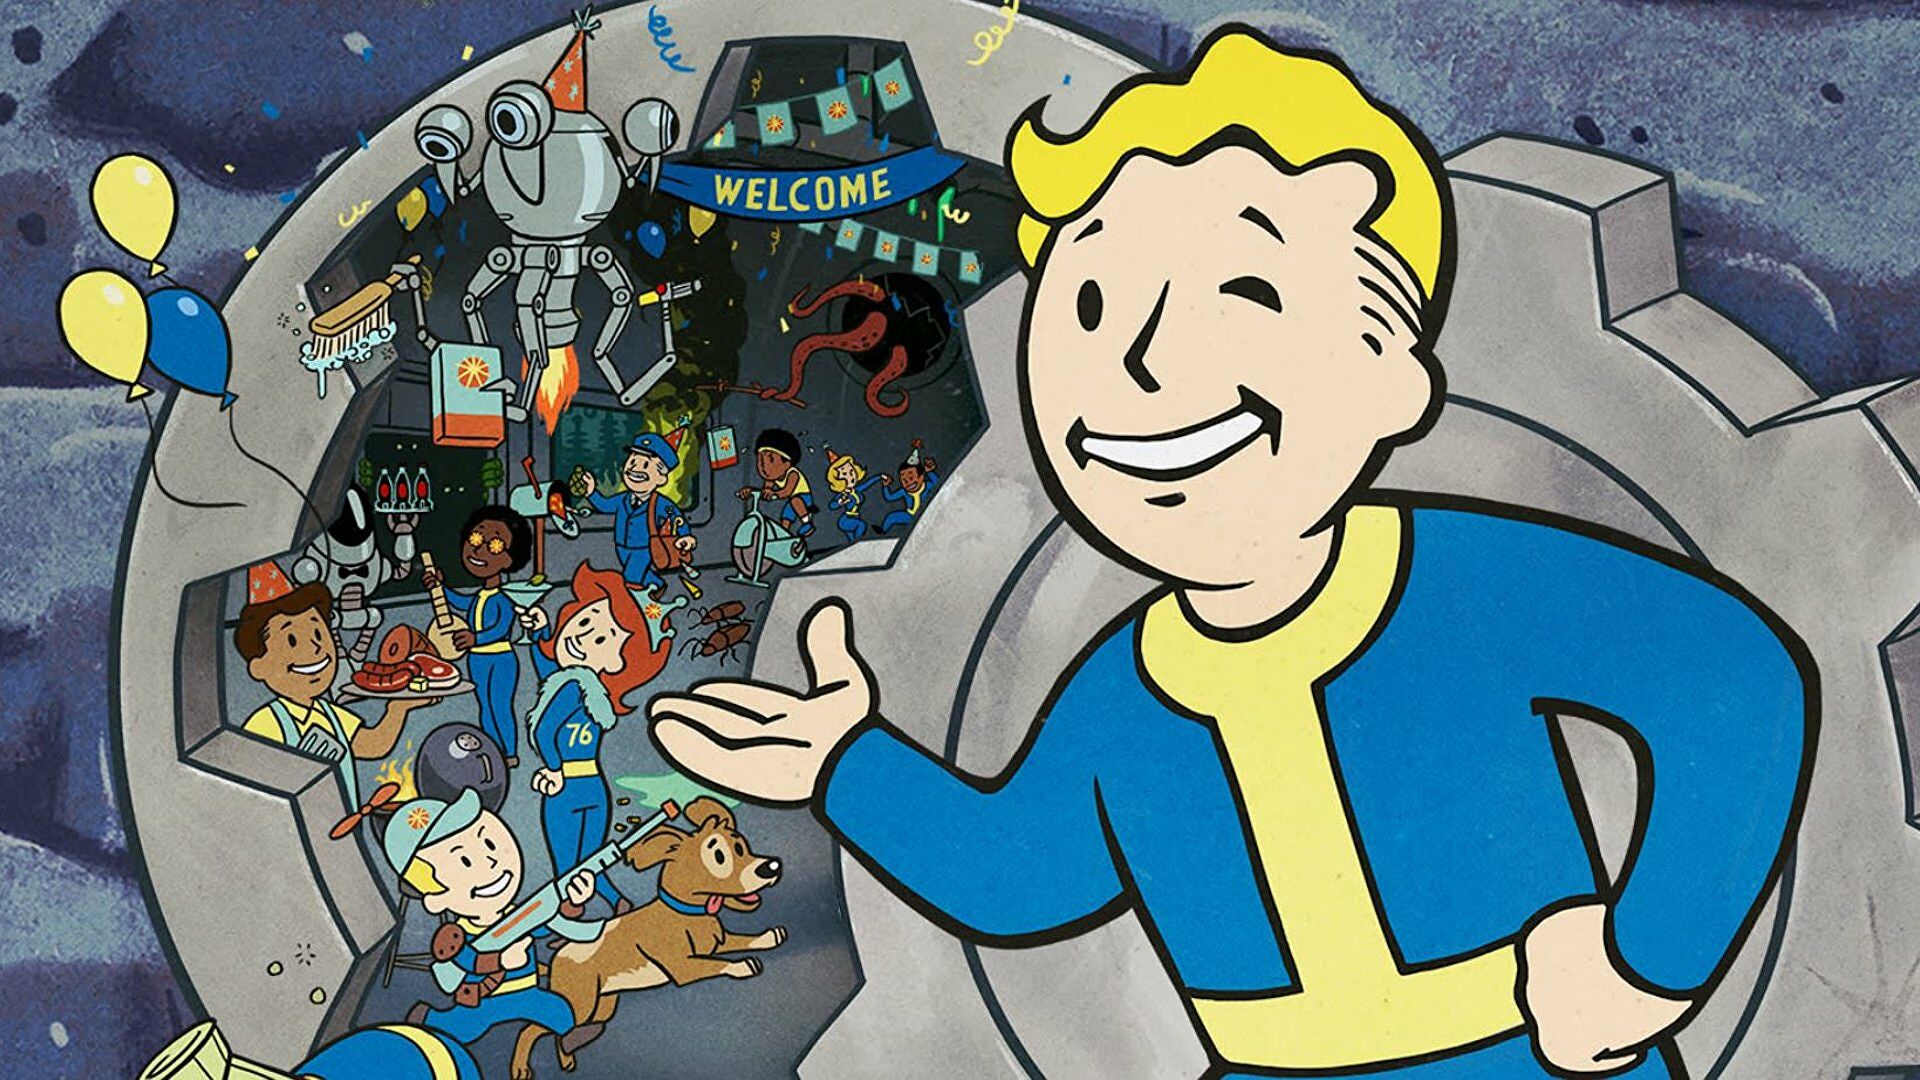 Former Bethesda staff allege that working on Fallout 76 was a “twisted nightmare”